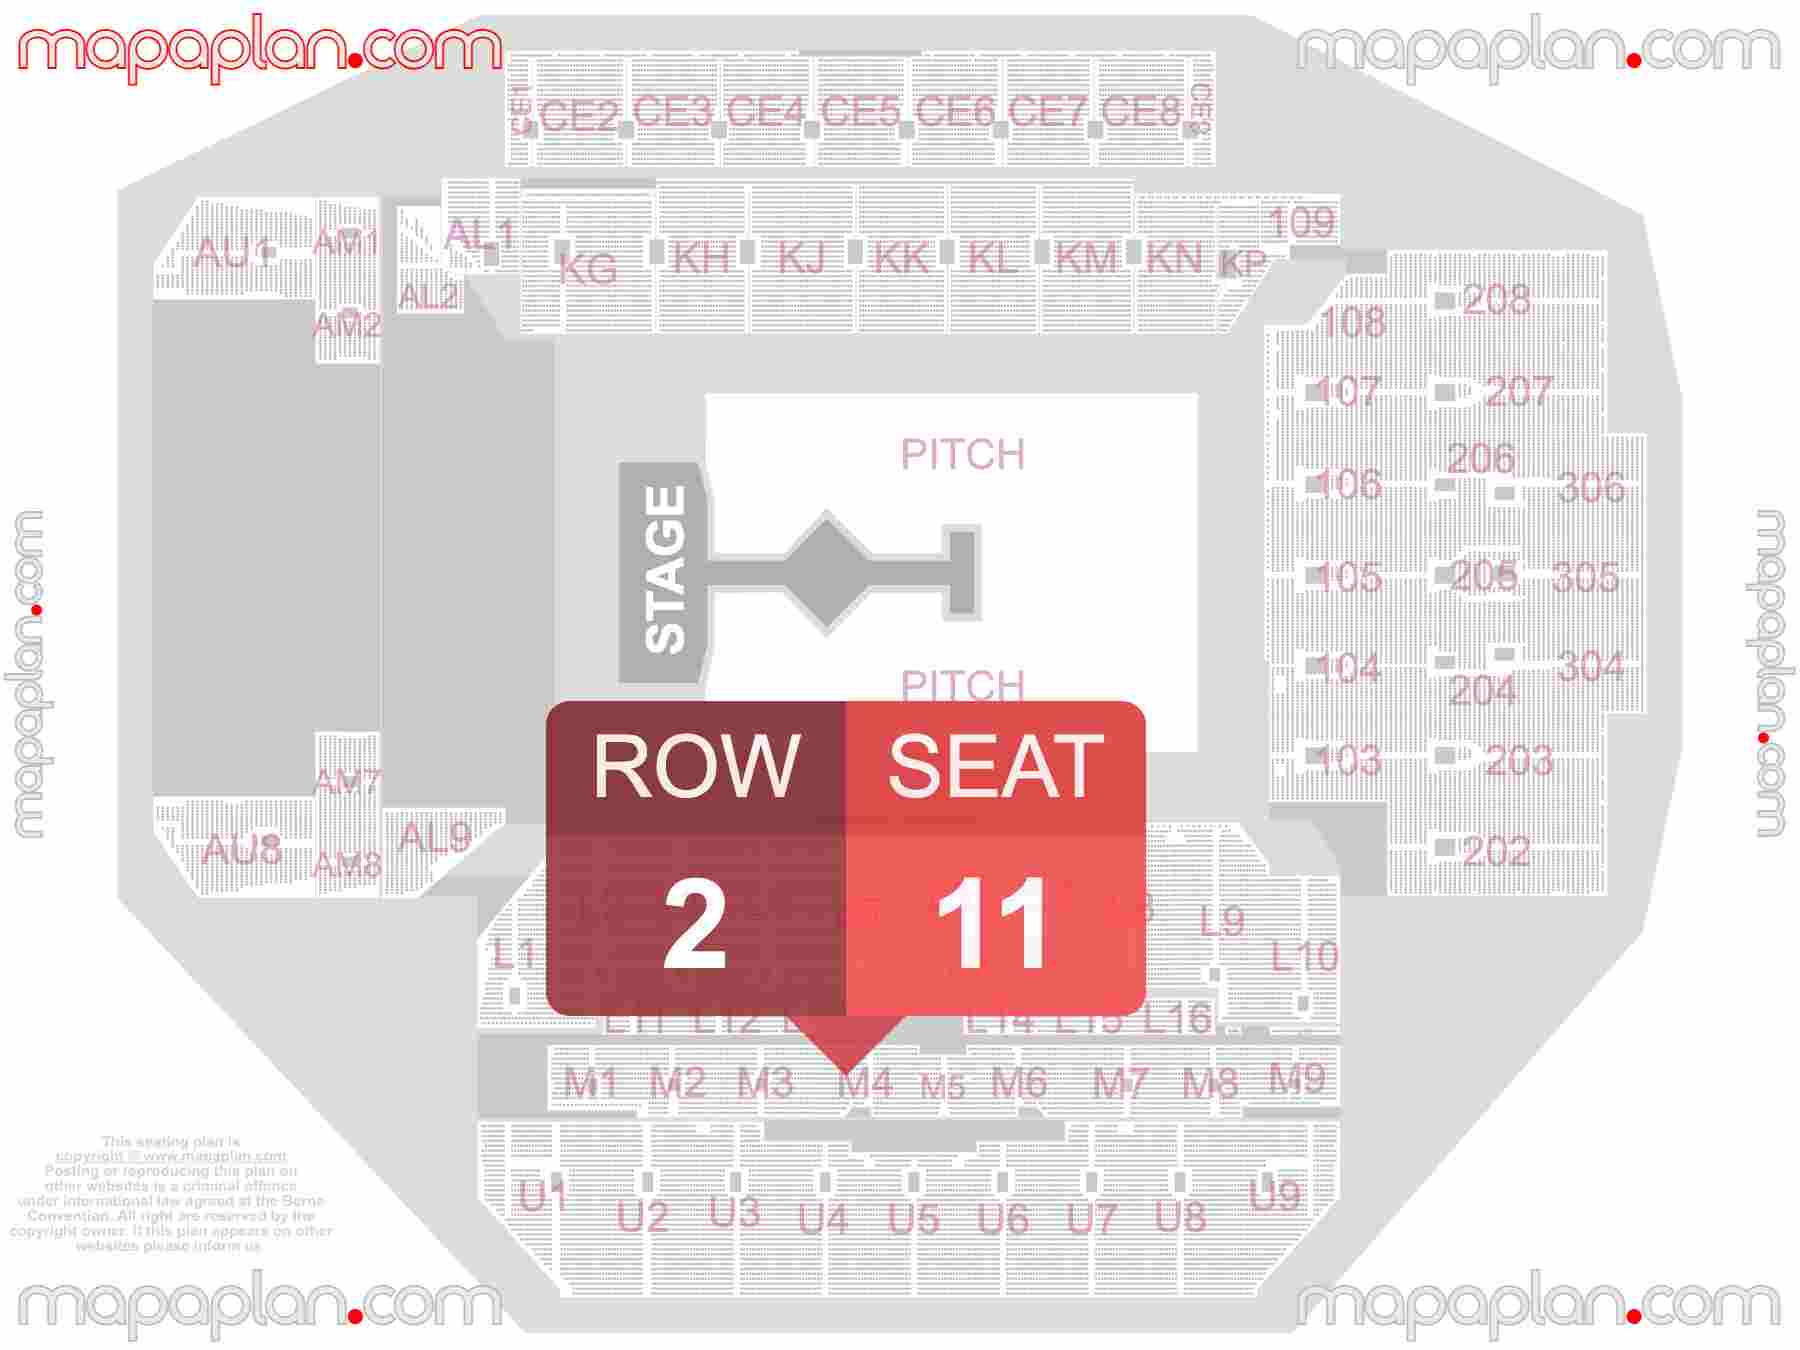 Liverpool FC Anfield Stadium seating plan Concert detailed seat numbers and row numbering plan with interactive map chart layout